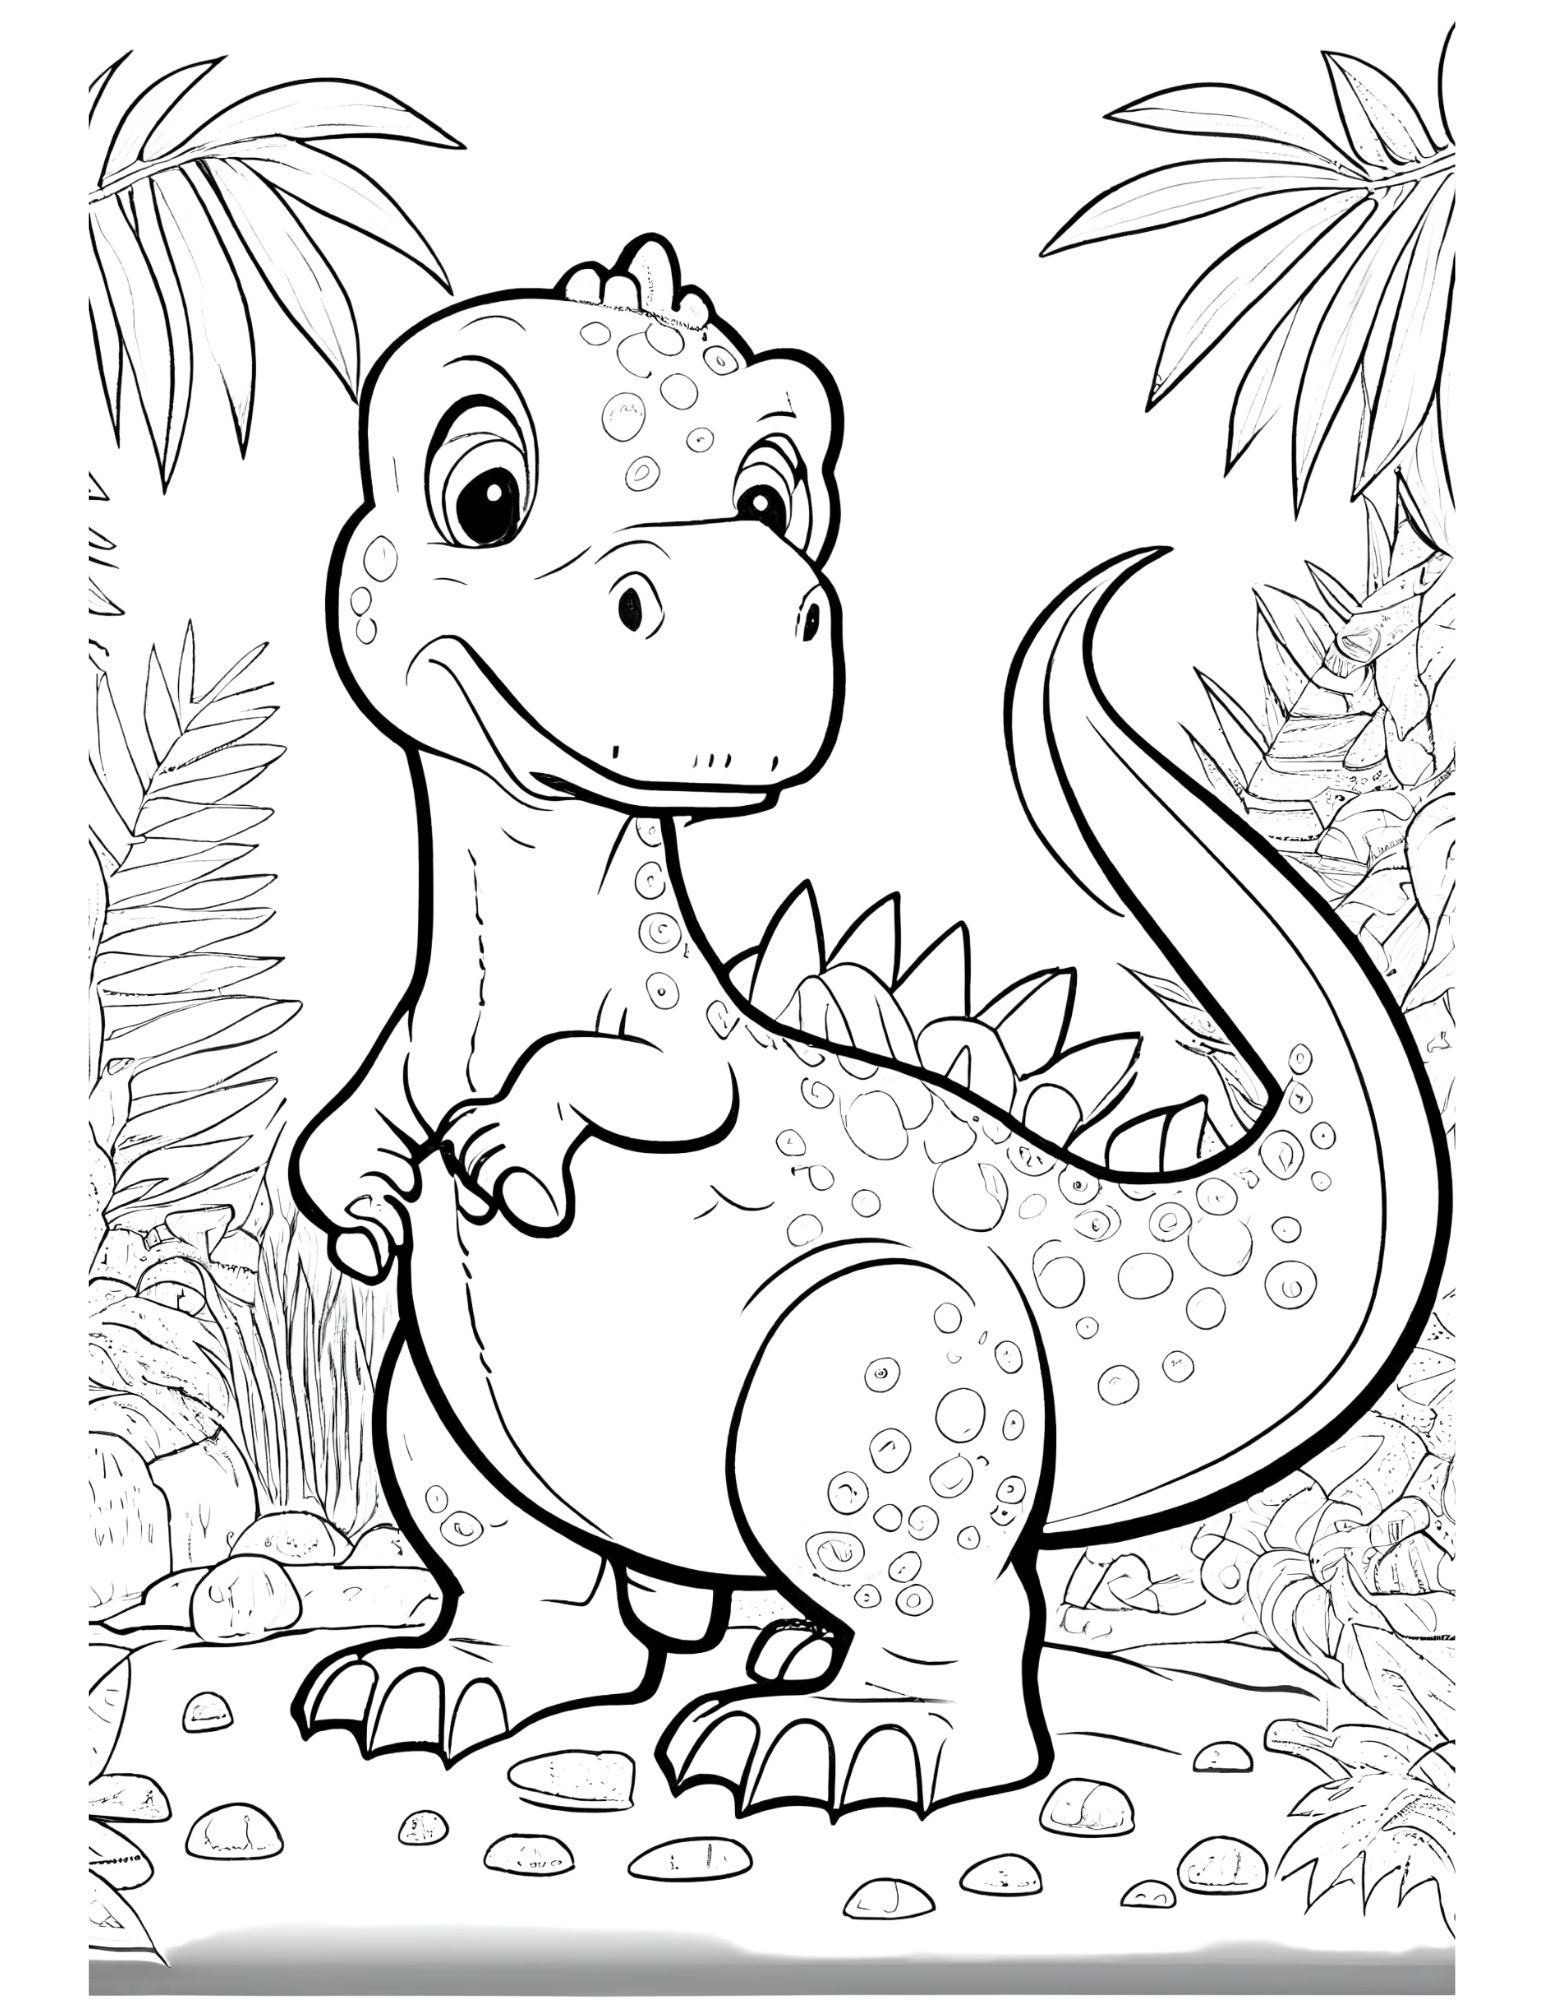 21+ Amazing Image of Dinosaur Coloring Page - birijus.com  Dinosaur  coloring sheets, Dinosaur coloring pages, Disney coloring pages